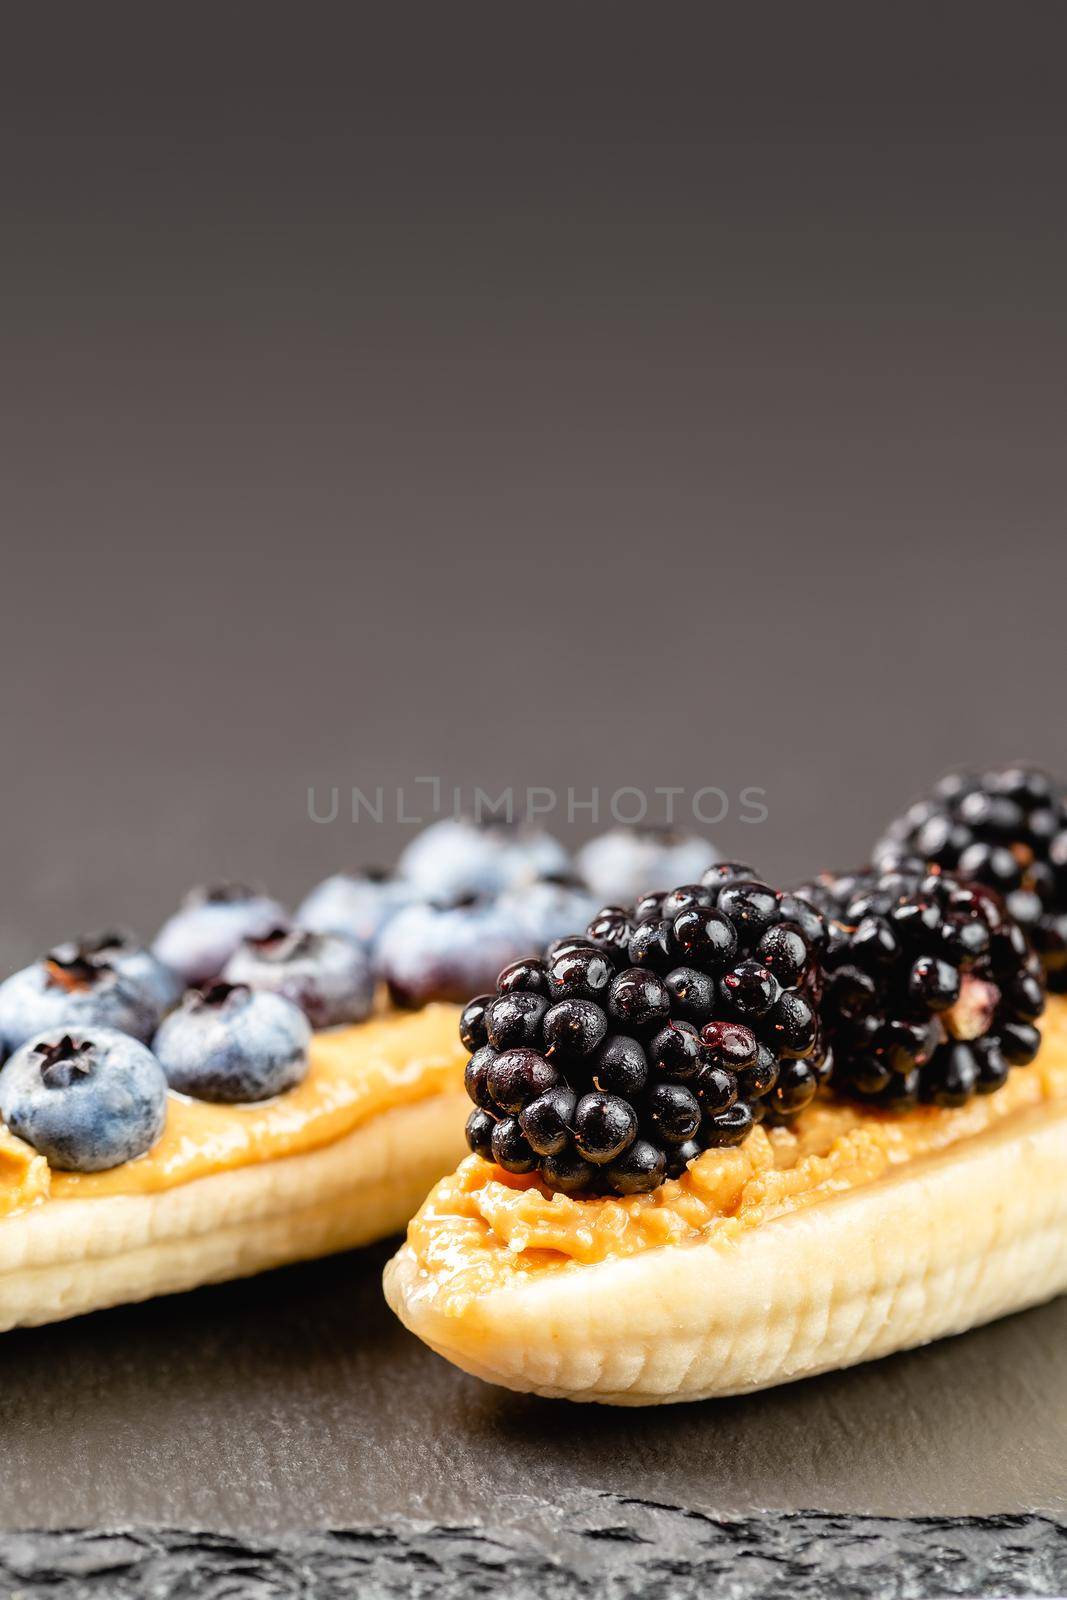 Bananas with peanut butter and berries on the top by Syvanych